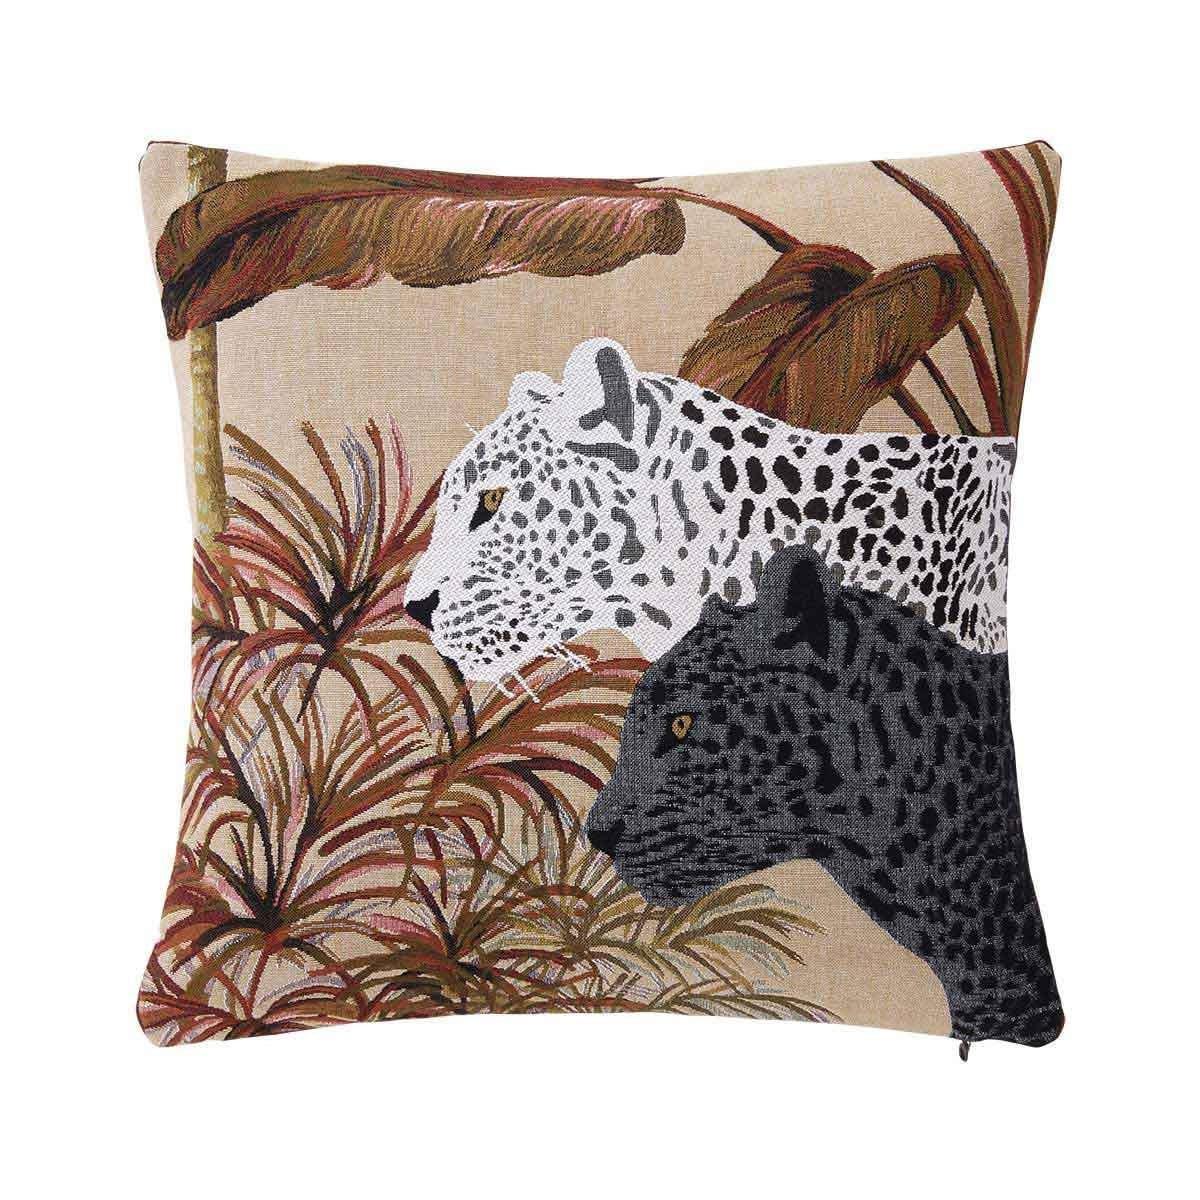 Decorative Pillows Iosis Japura Decorative Pillow by Yves Delorme Yves Delorme